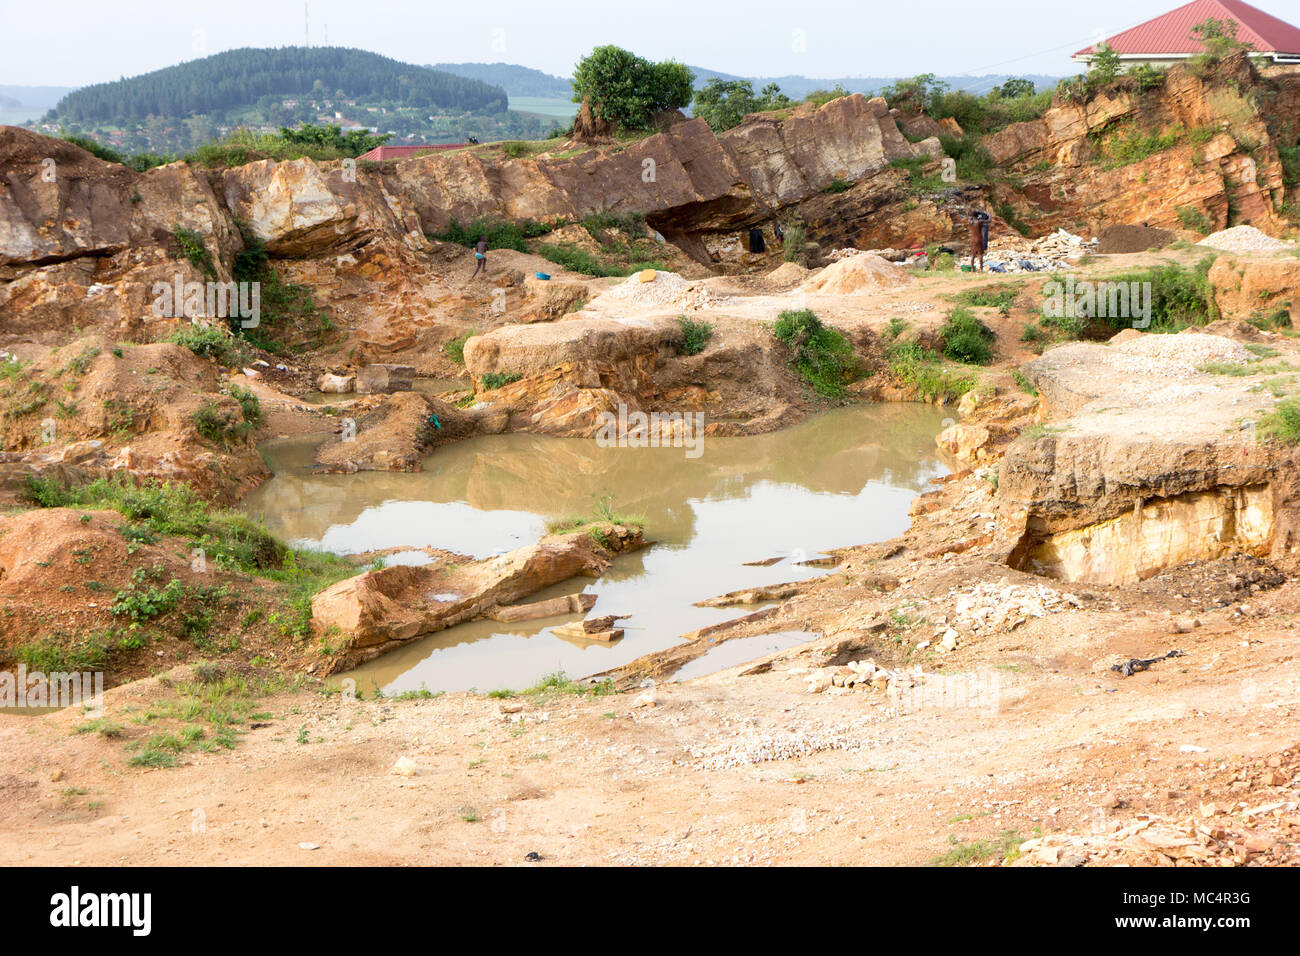 A small lake or a big puddle in a quarry in Uganda, June 2017. Stock Photo